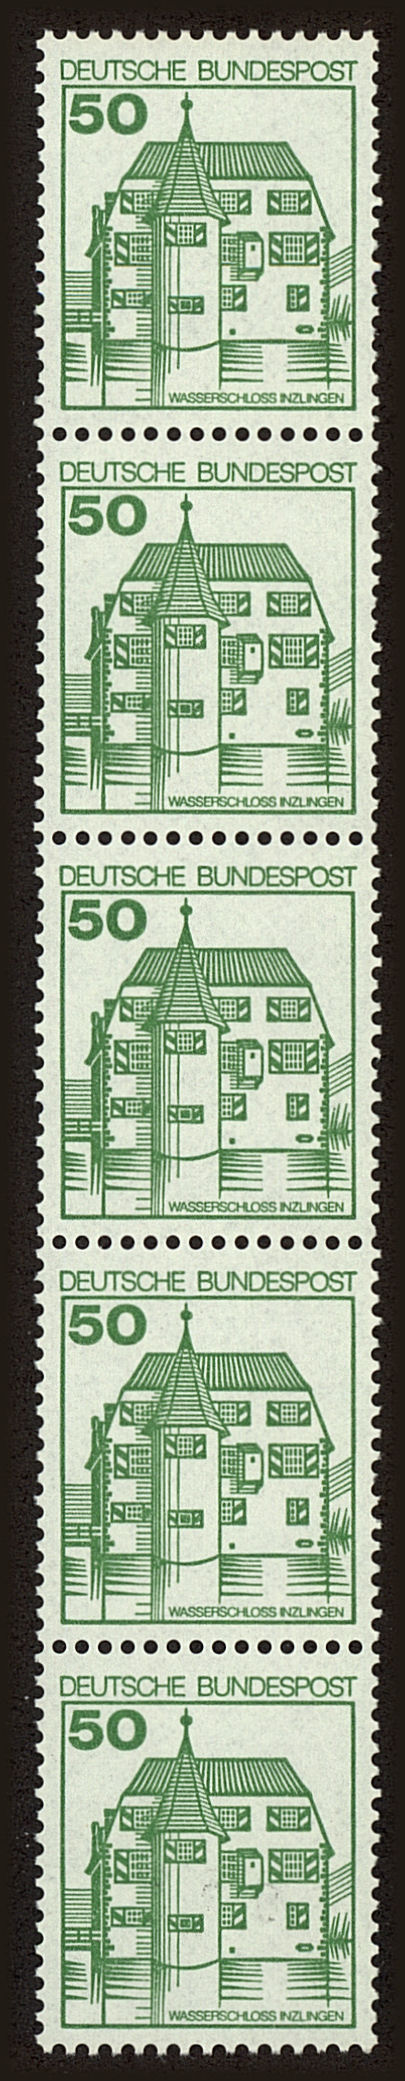 Front view of Germany 1310 collectors stamp